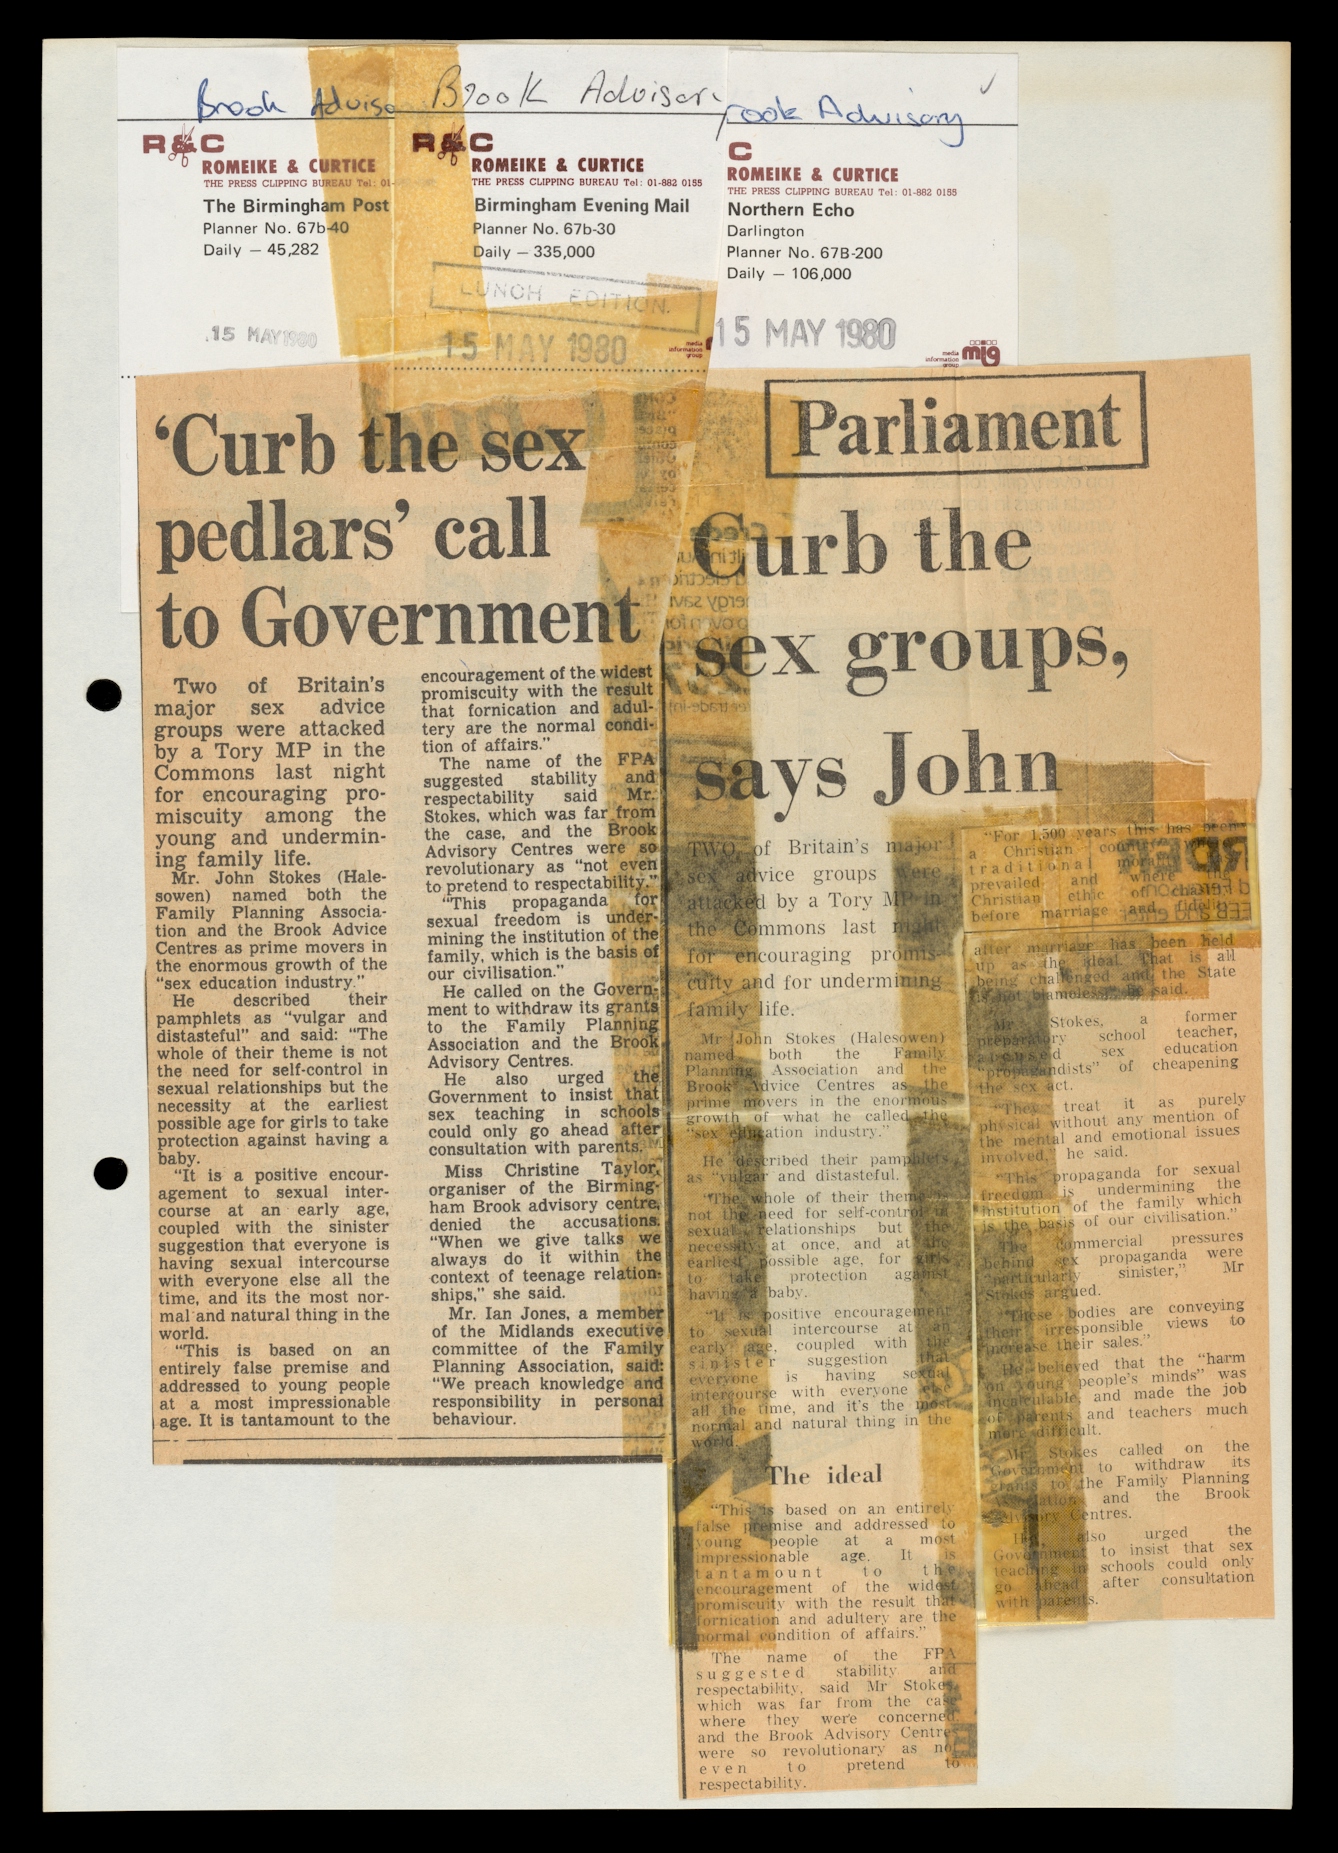 Photograph of archive material from the 1980s against a black background. The image shows an A4 sized hole punched piece of card with two yellowed newspaper cuttings sellotaped onto the card. The cutting on the left carries the headline, "'Curb the sex pedlars' call to Government". The cutting to the right carries the headline, "Curb the sex groups, says John".